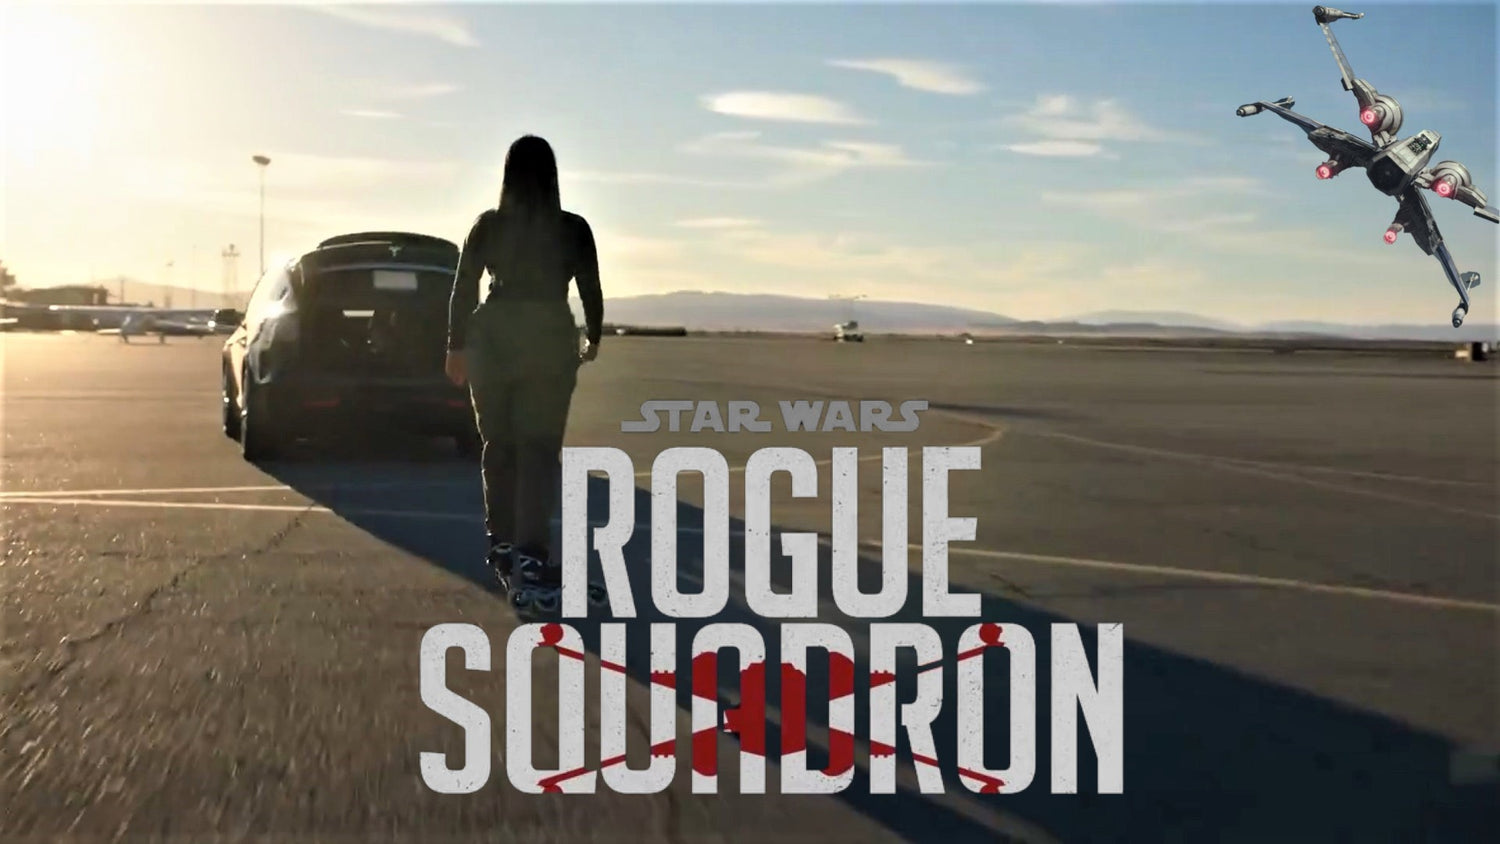 Tesla Model X Featured in New Star Wars Rogue Squadron Teaser